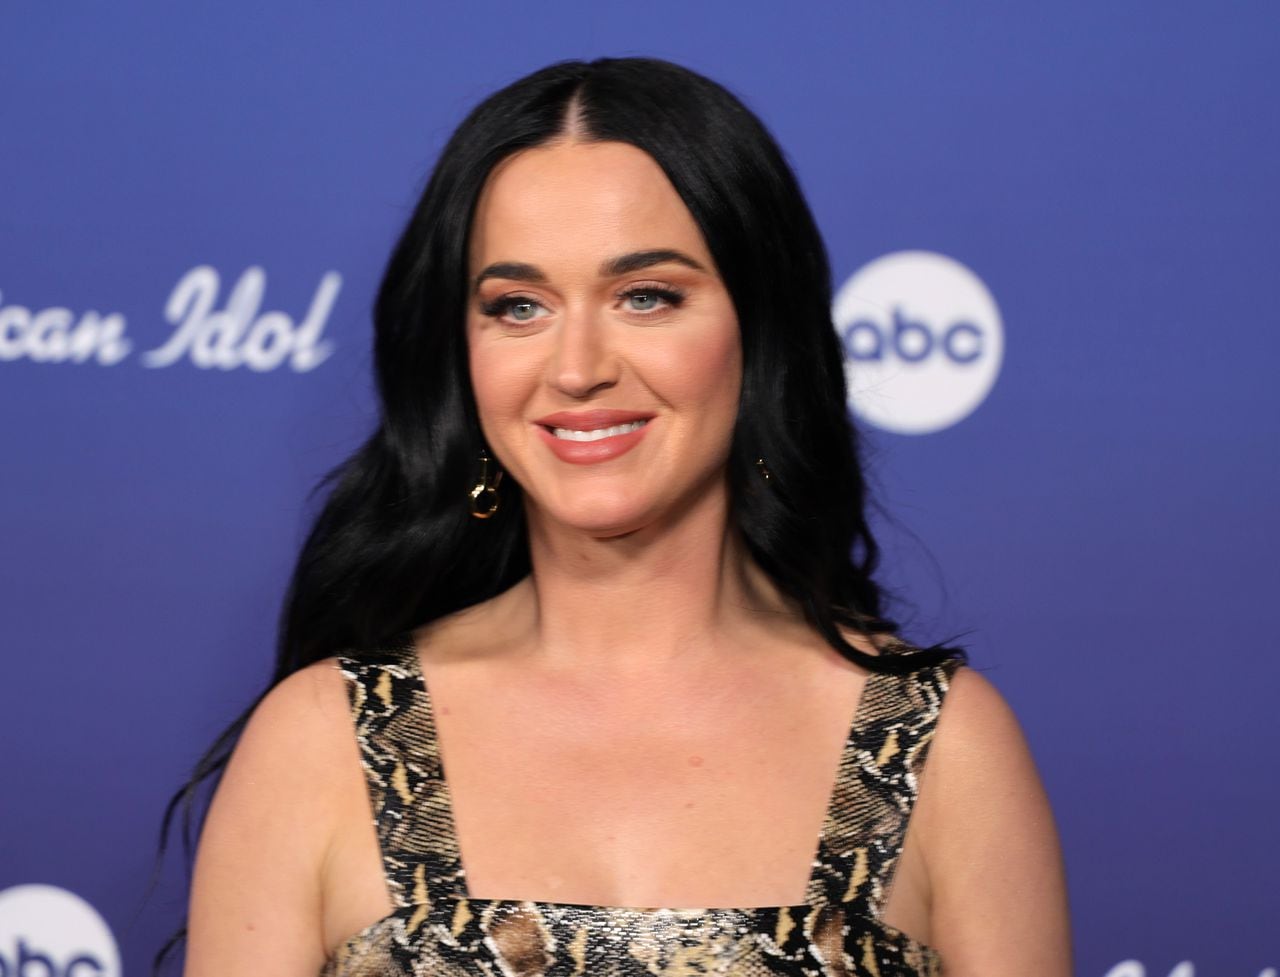 LOS ANGELES, CALIFORNIA - APRIL 18: Katy Perry attends "American Idol" 20th Anniversary Celebration at Desert 5 Spot on April 18, 2022 in Los Angeles, California. (Photo by Momodu Mansaray/Getty Images)